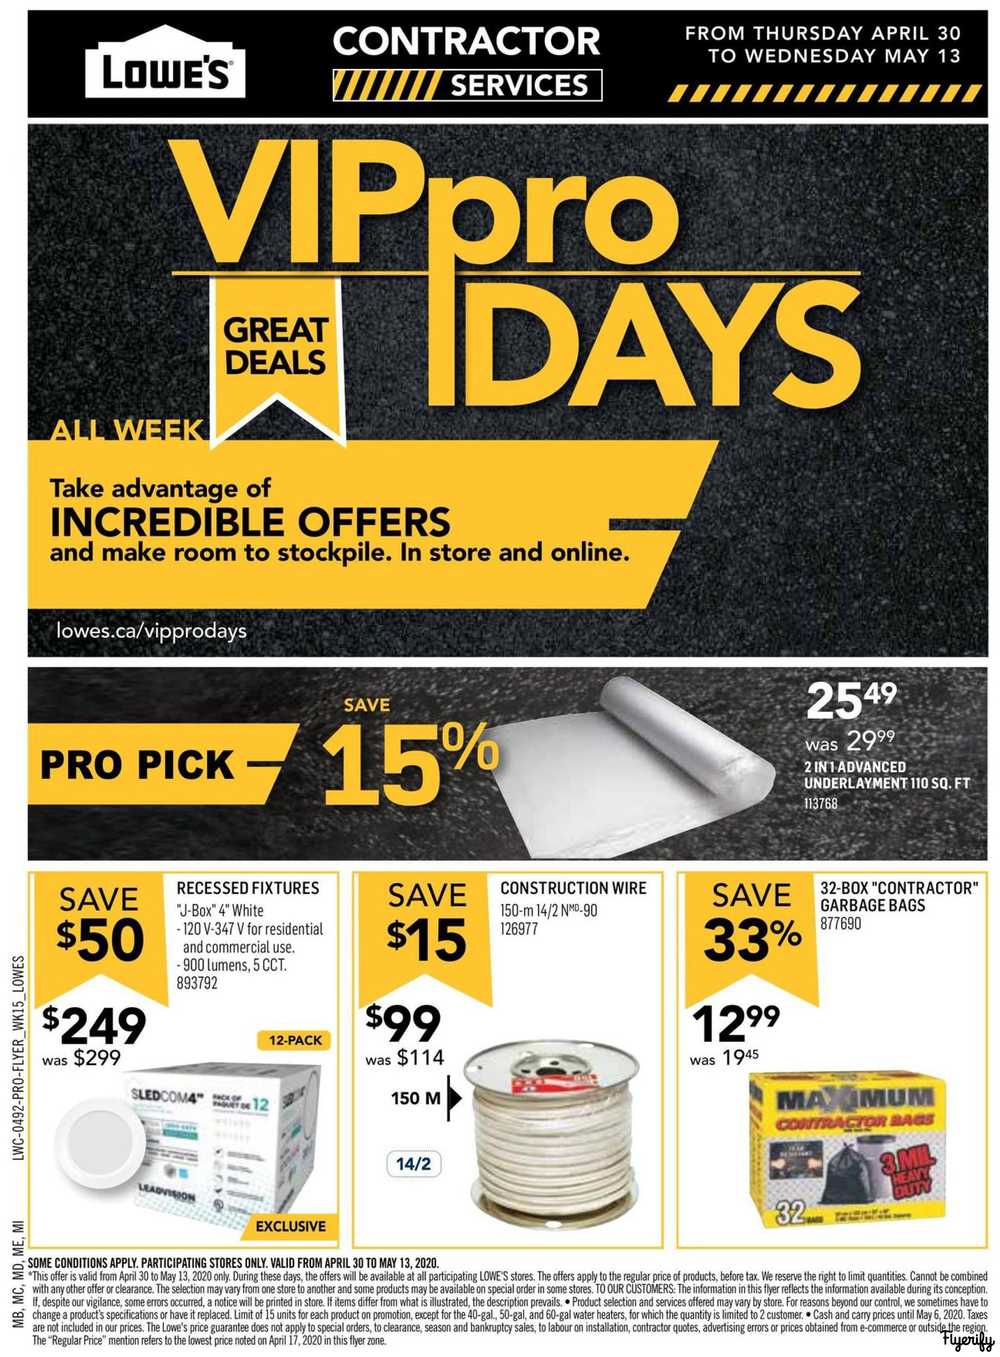 Lowe's VIP Pro Days Flyer April 30 to May 13 Canada